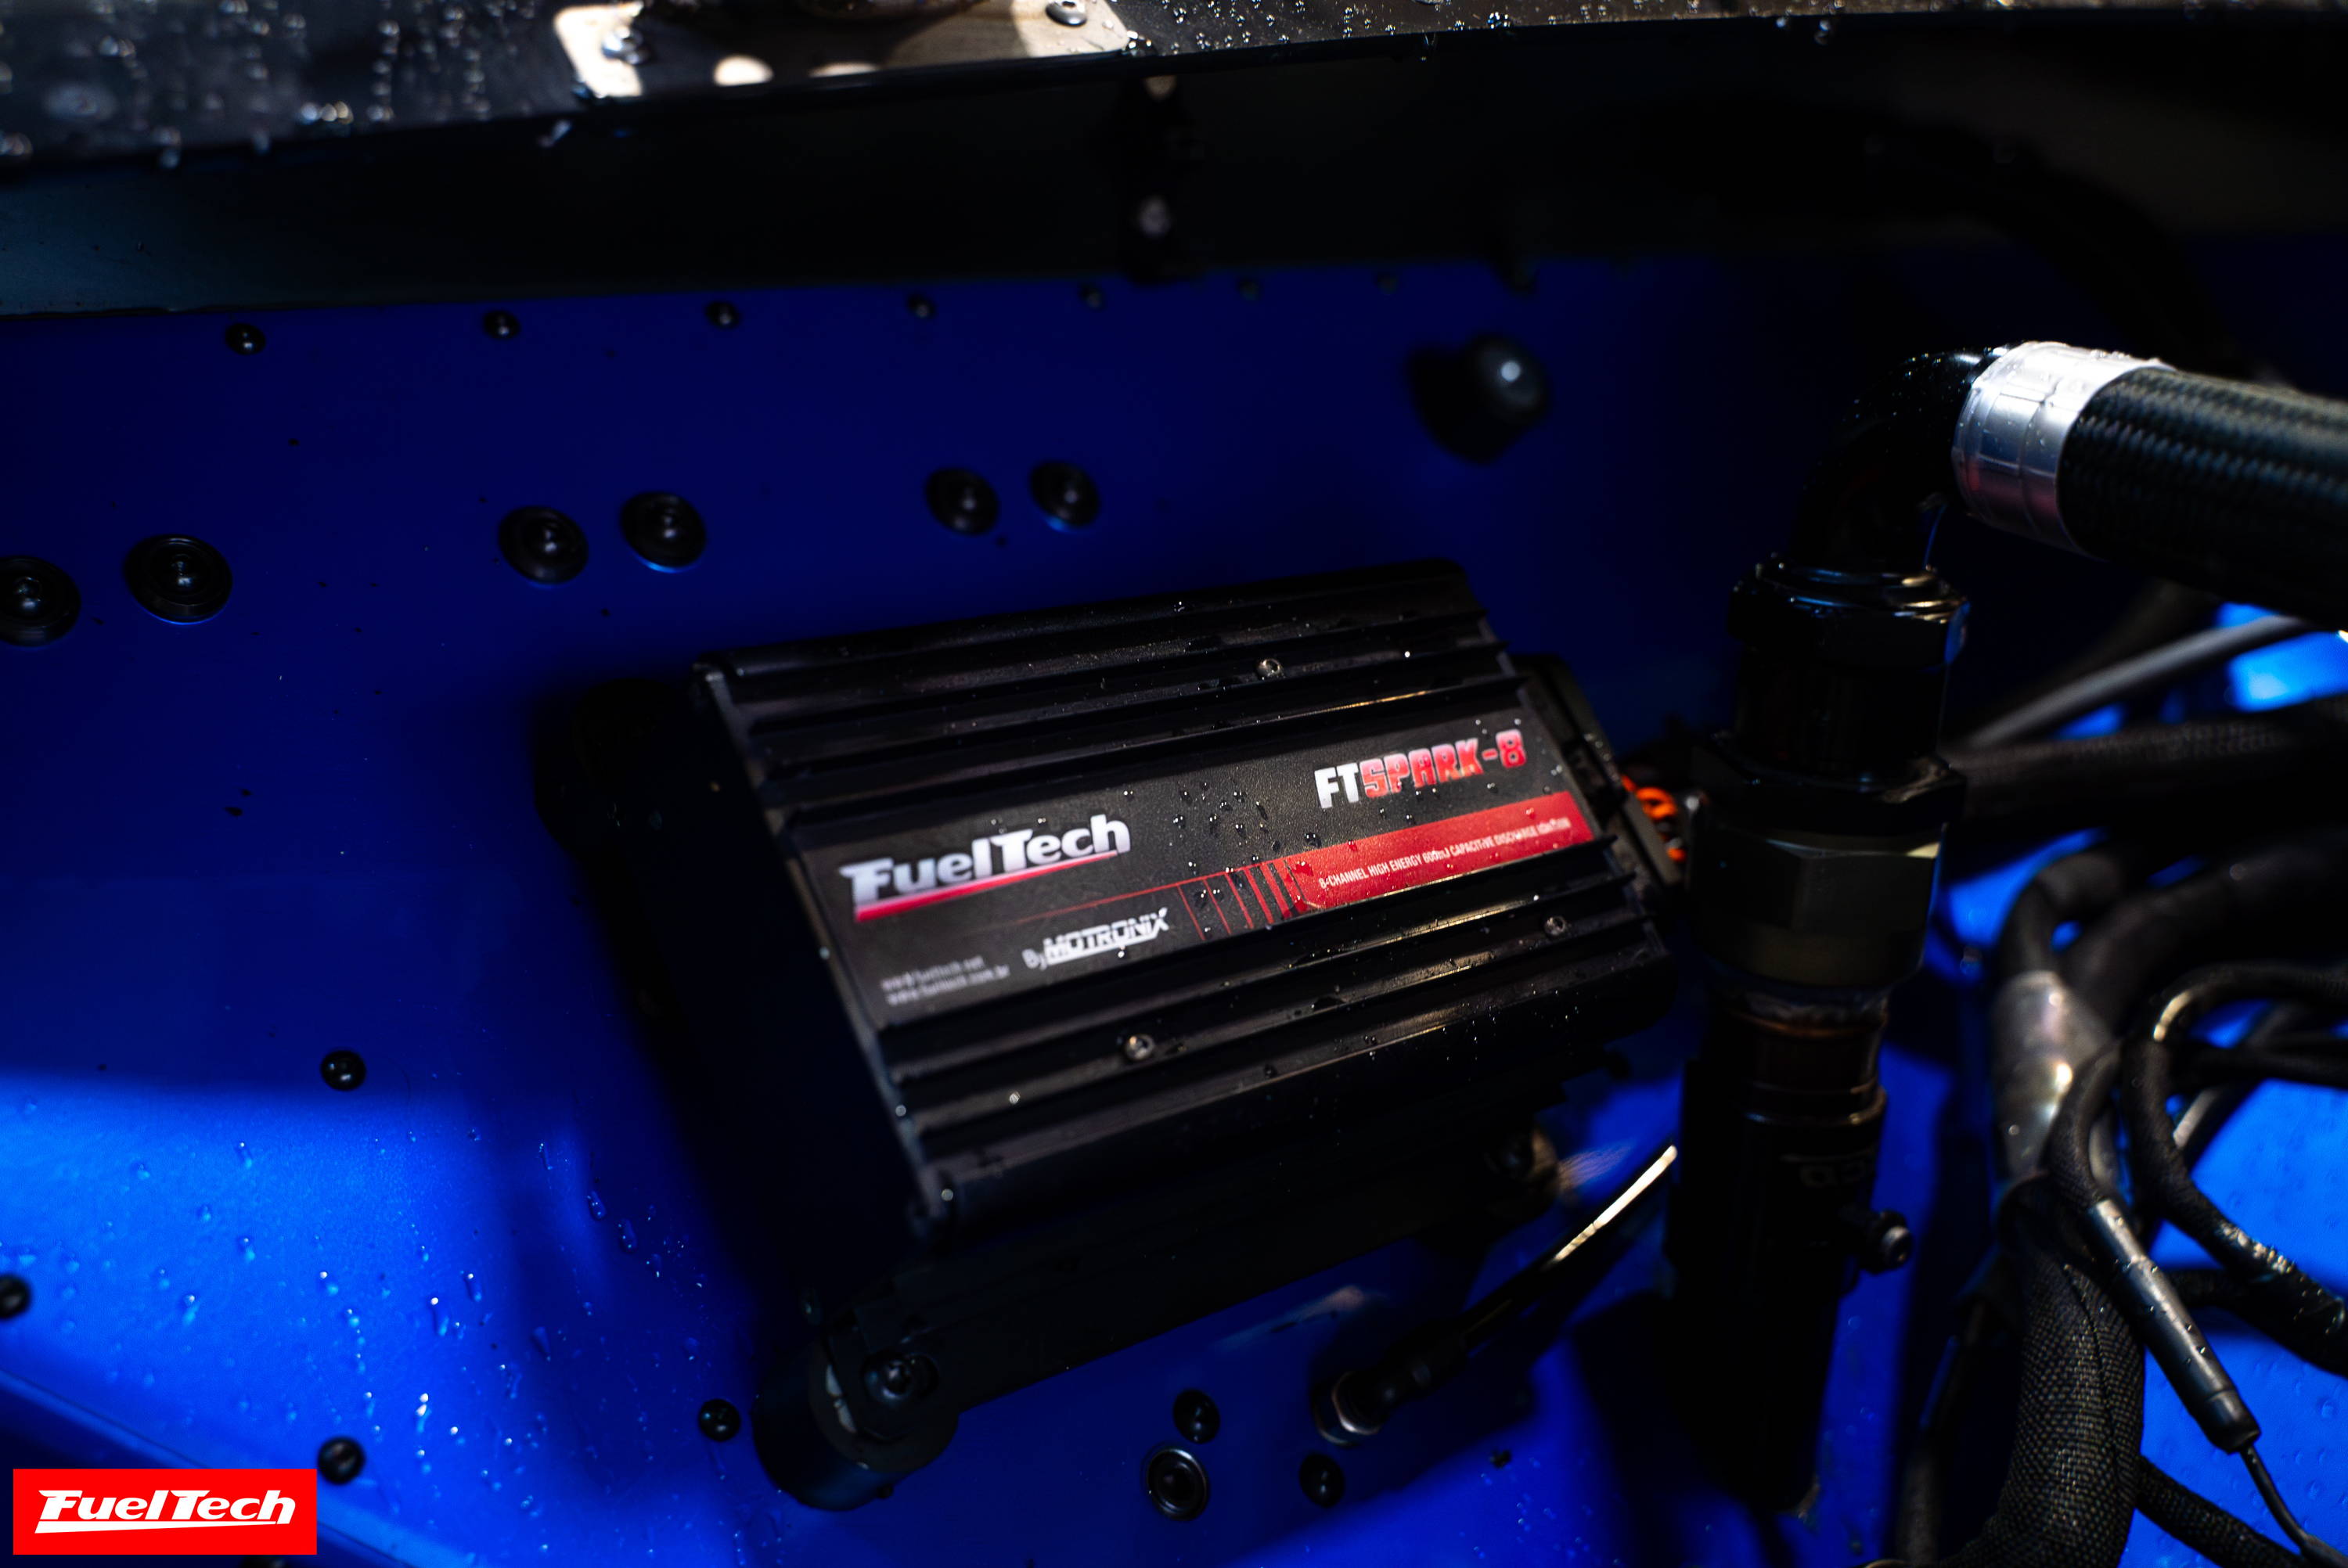 FuelTech FTSPARK-8 ignition system for high horsepower applications like racing. 